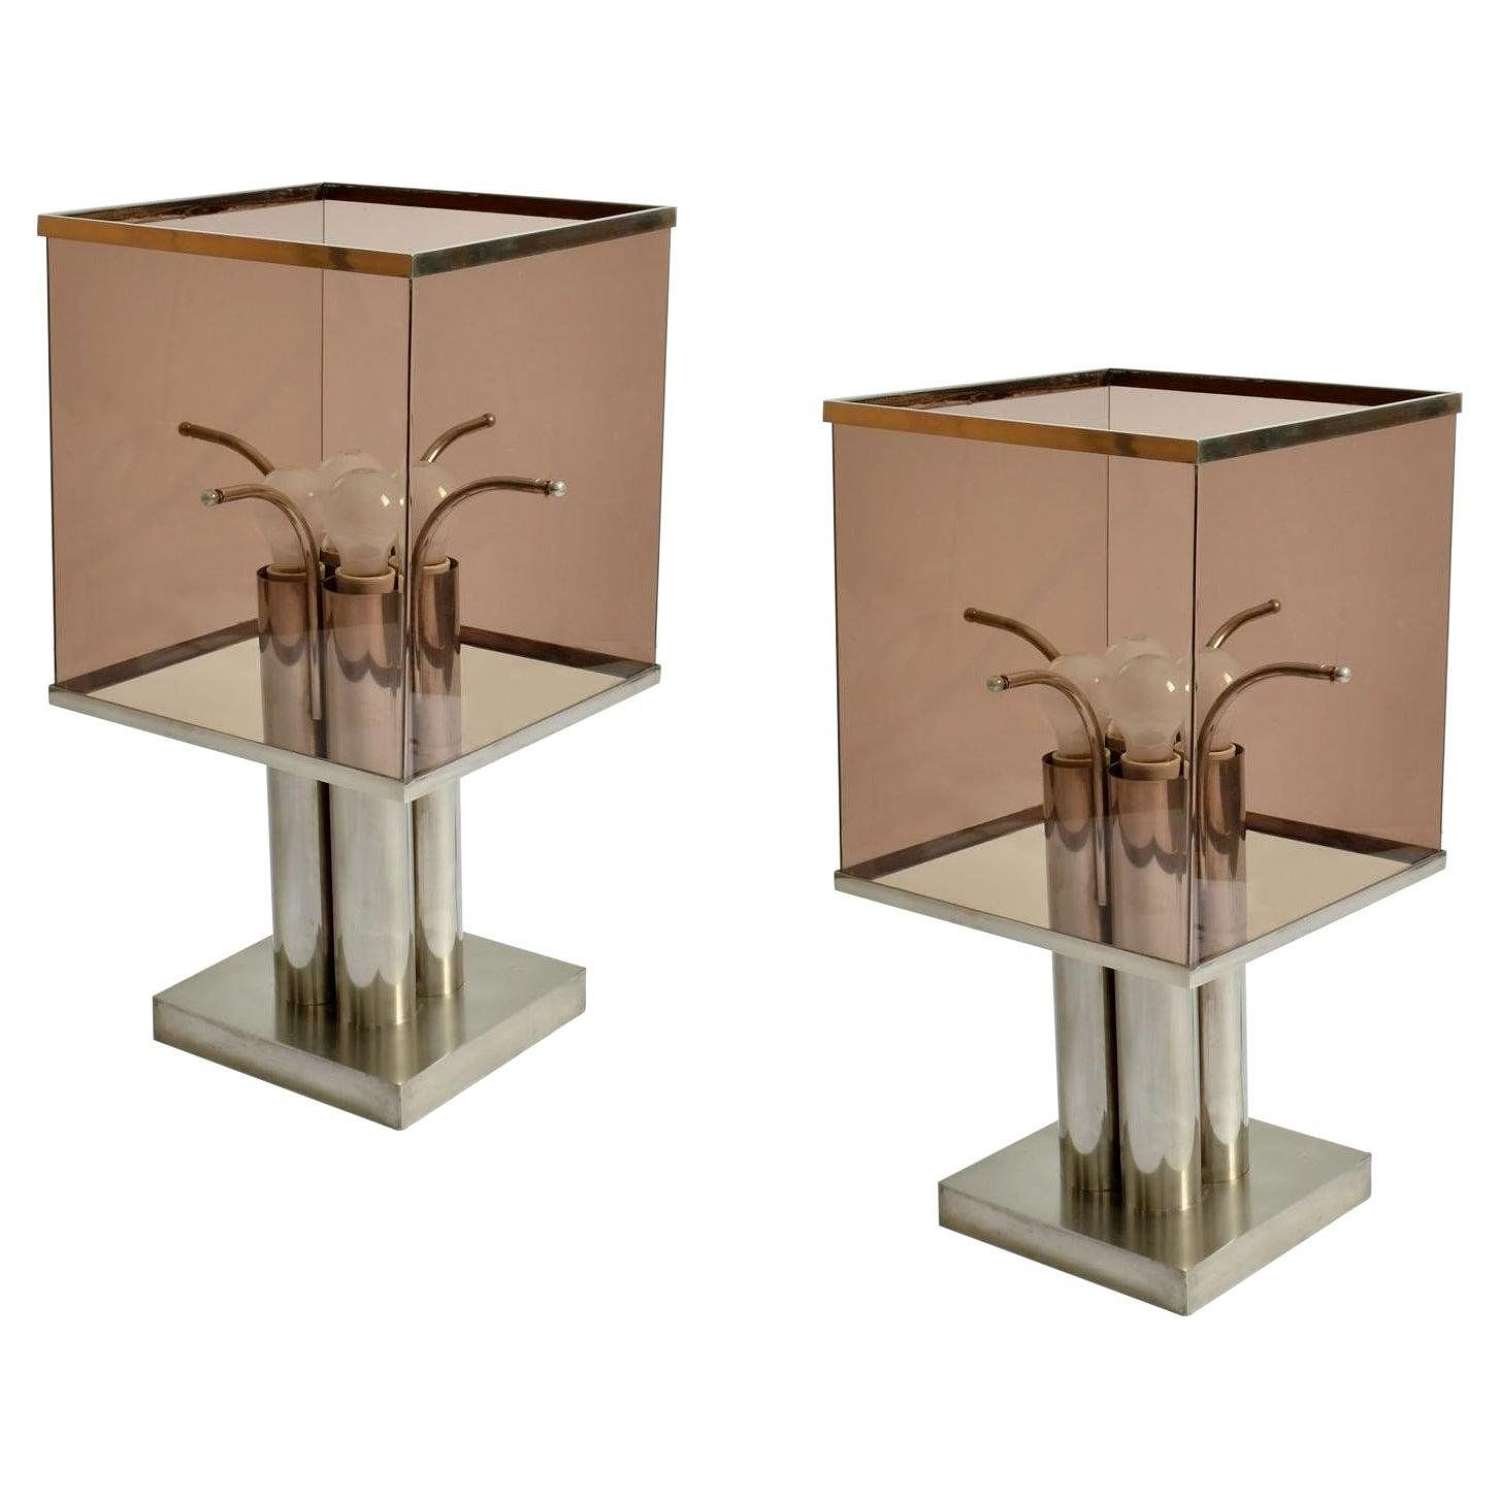 A pair of Sculptural Square Table Lamps Attributed to Romeo Rega